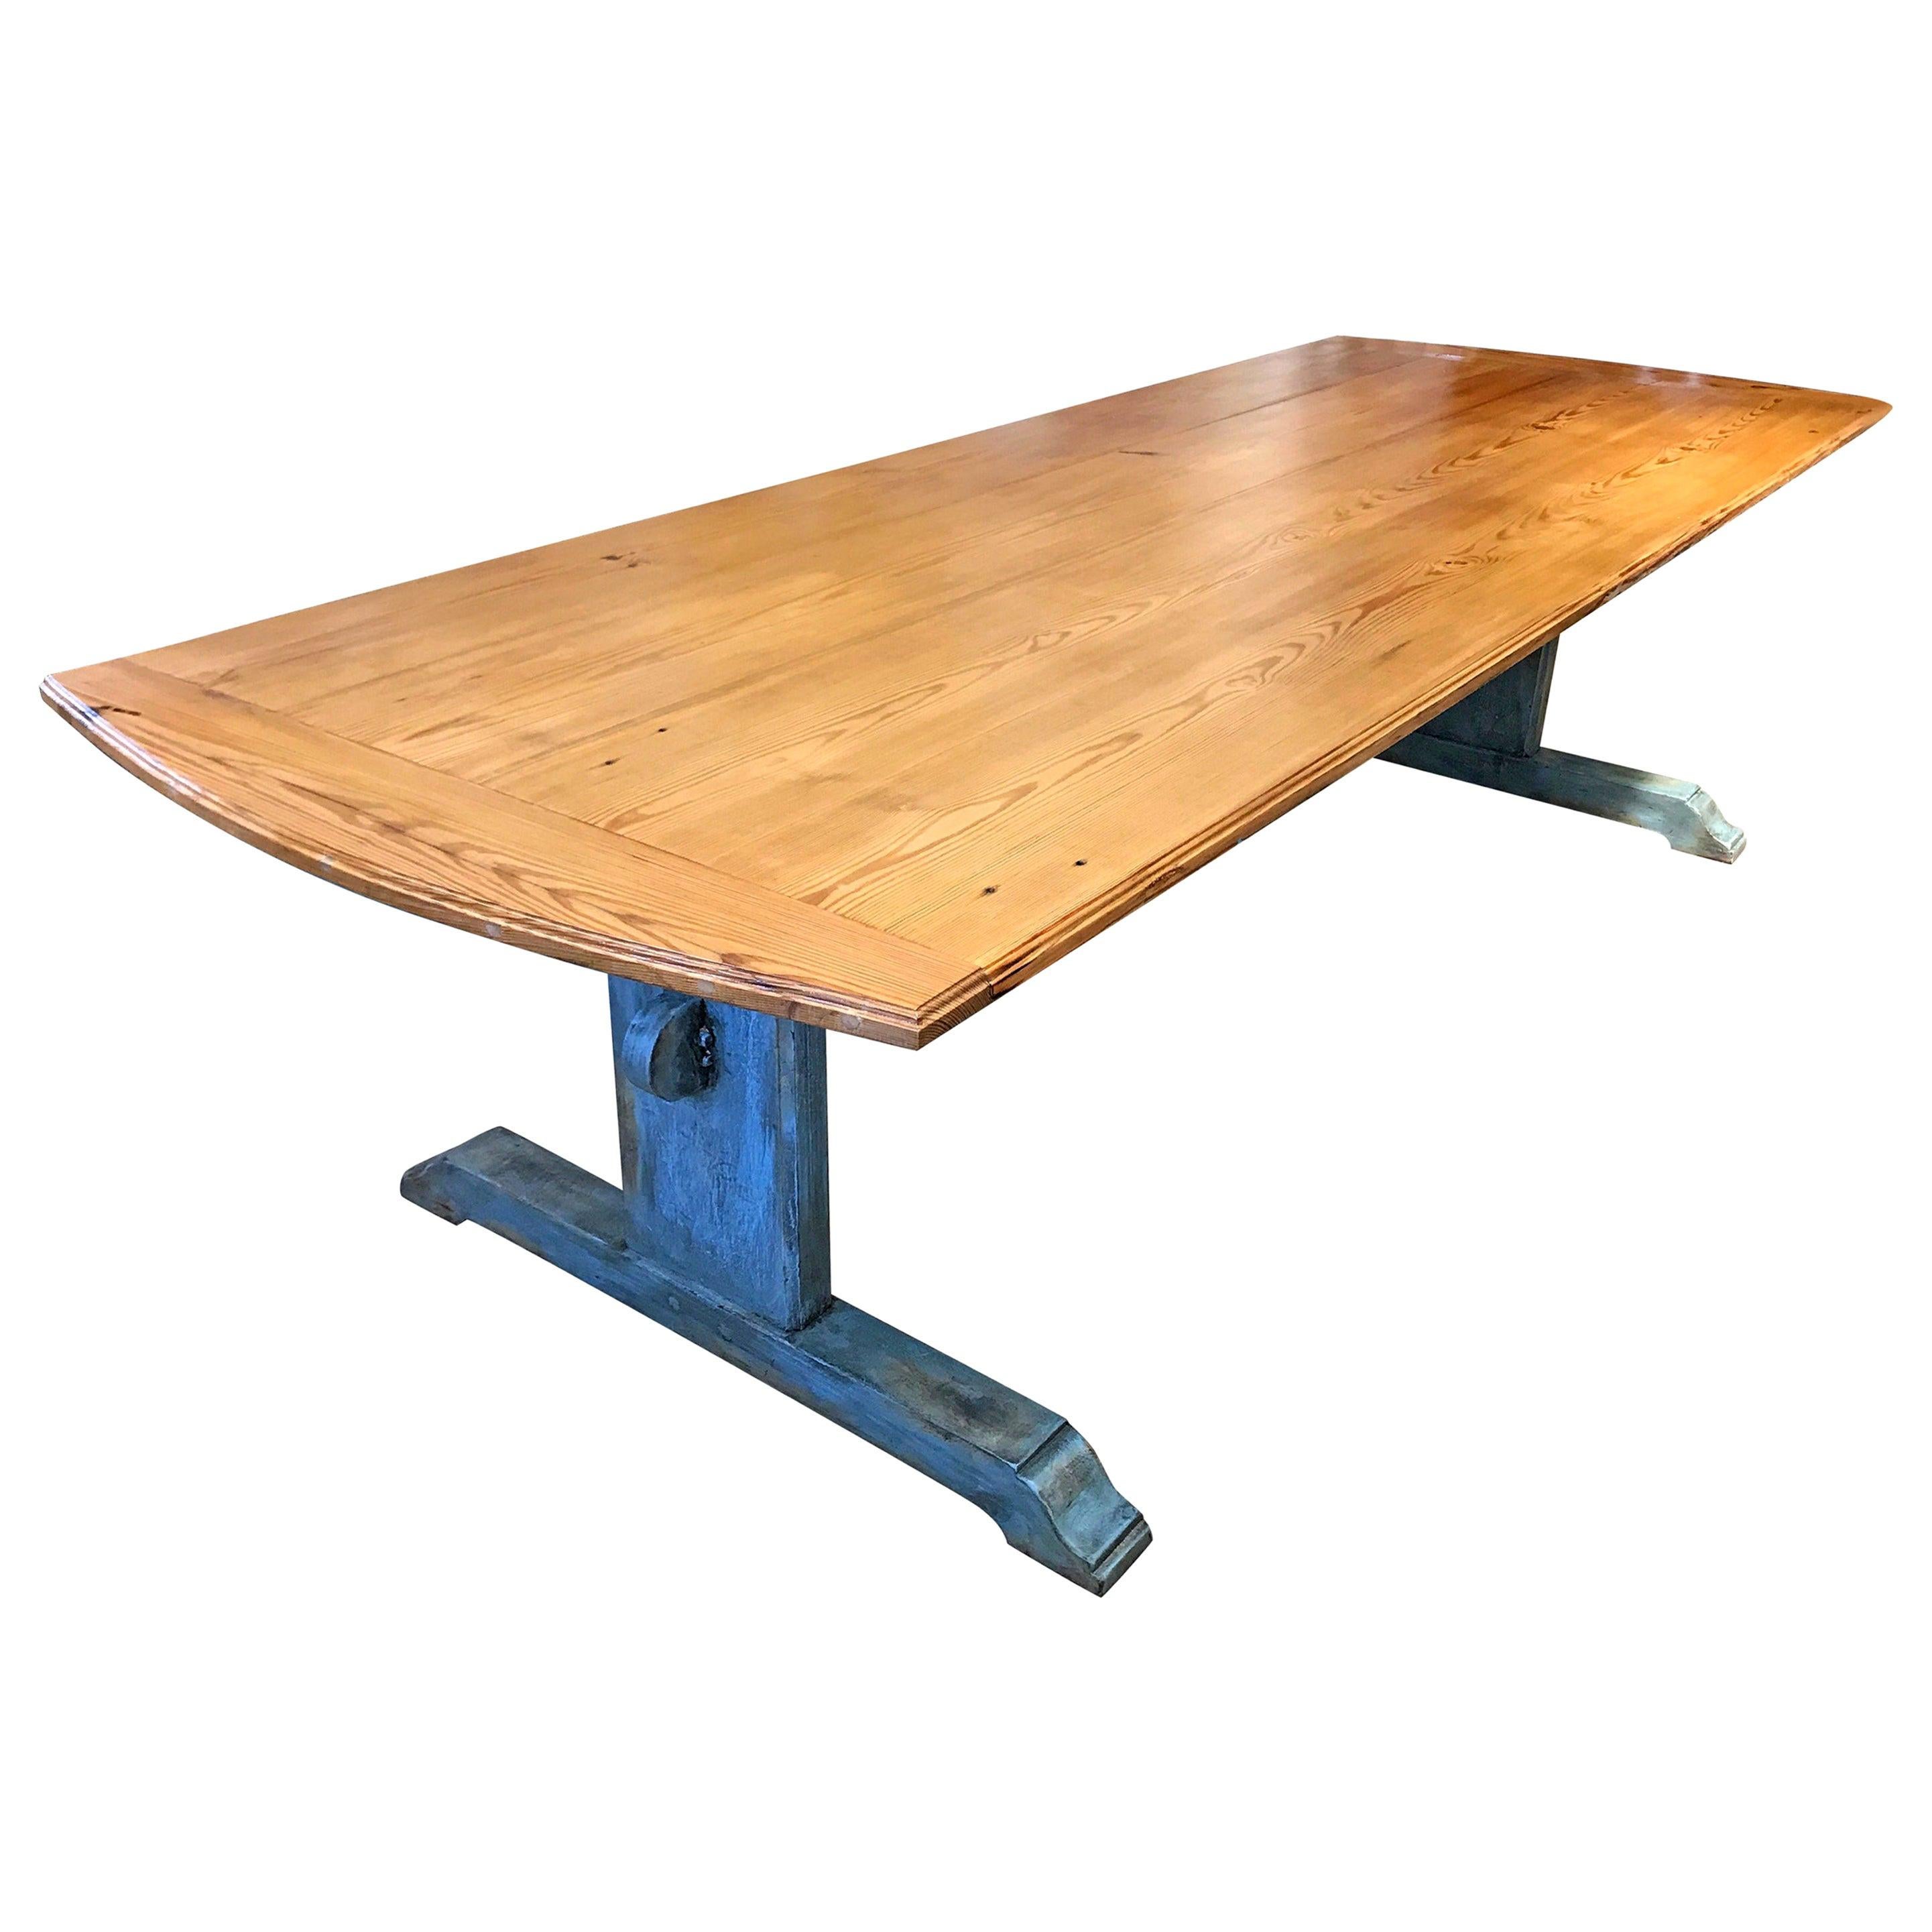 Large 19th Century Scandinavian Pine Dining Table with Blue Painted Trestle